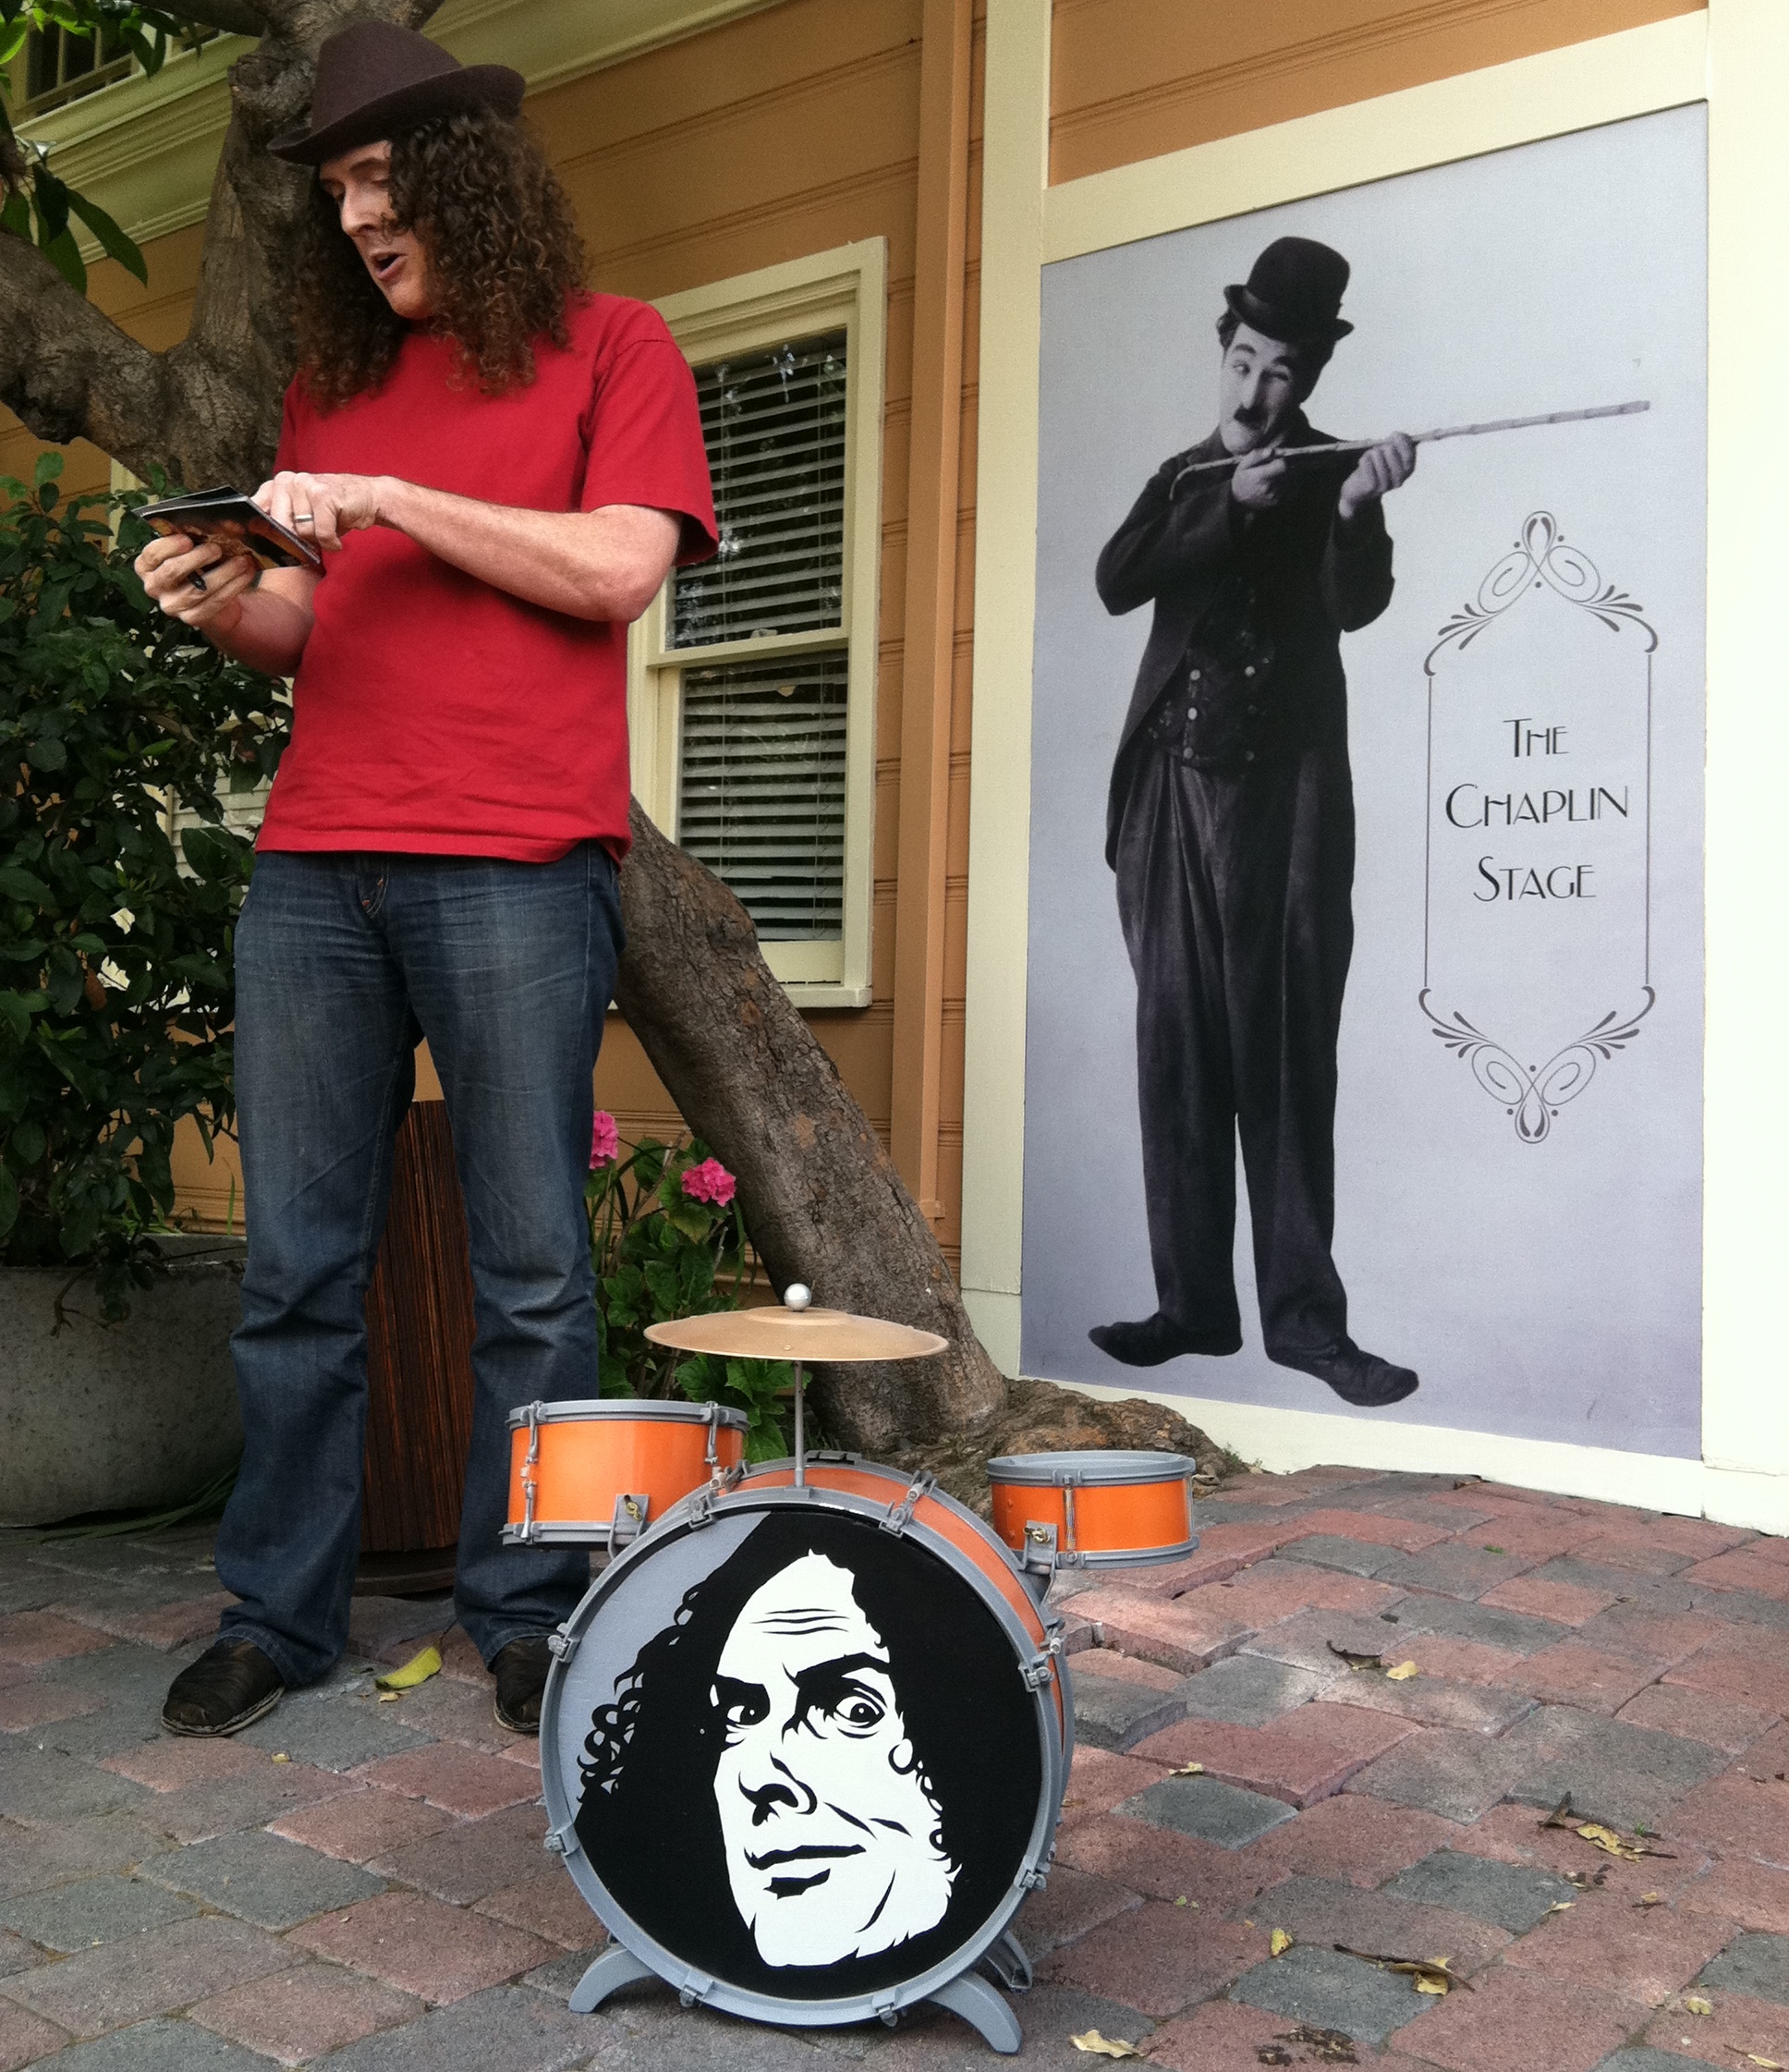 Weid Al Yankovic w/ custom drumset made/painted for a video of his.